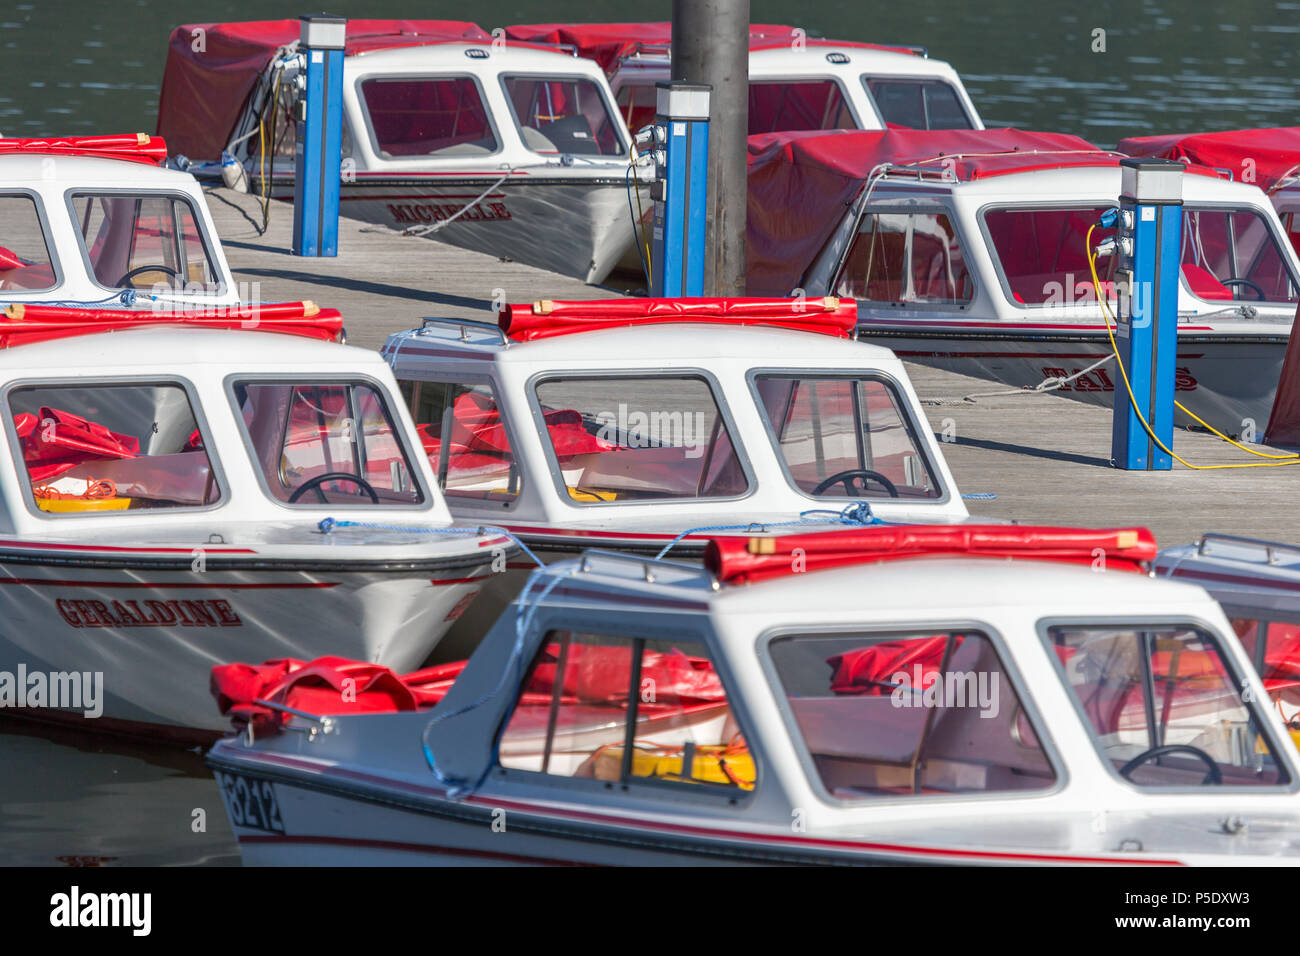 Electrical Powered motor boats for hire to tourists at Bowness-On Windermere in the English Lake District National Park Stock Photo